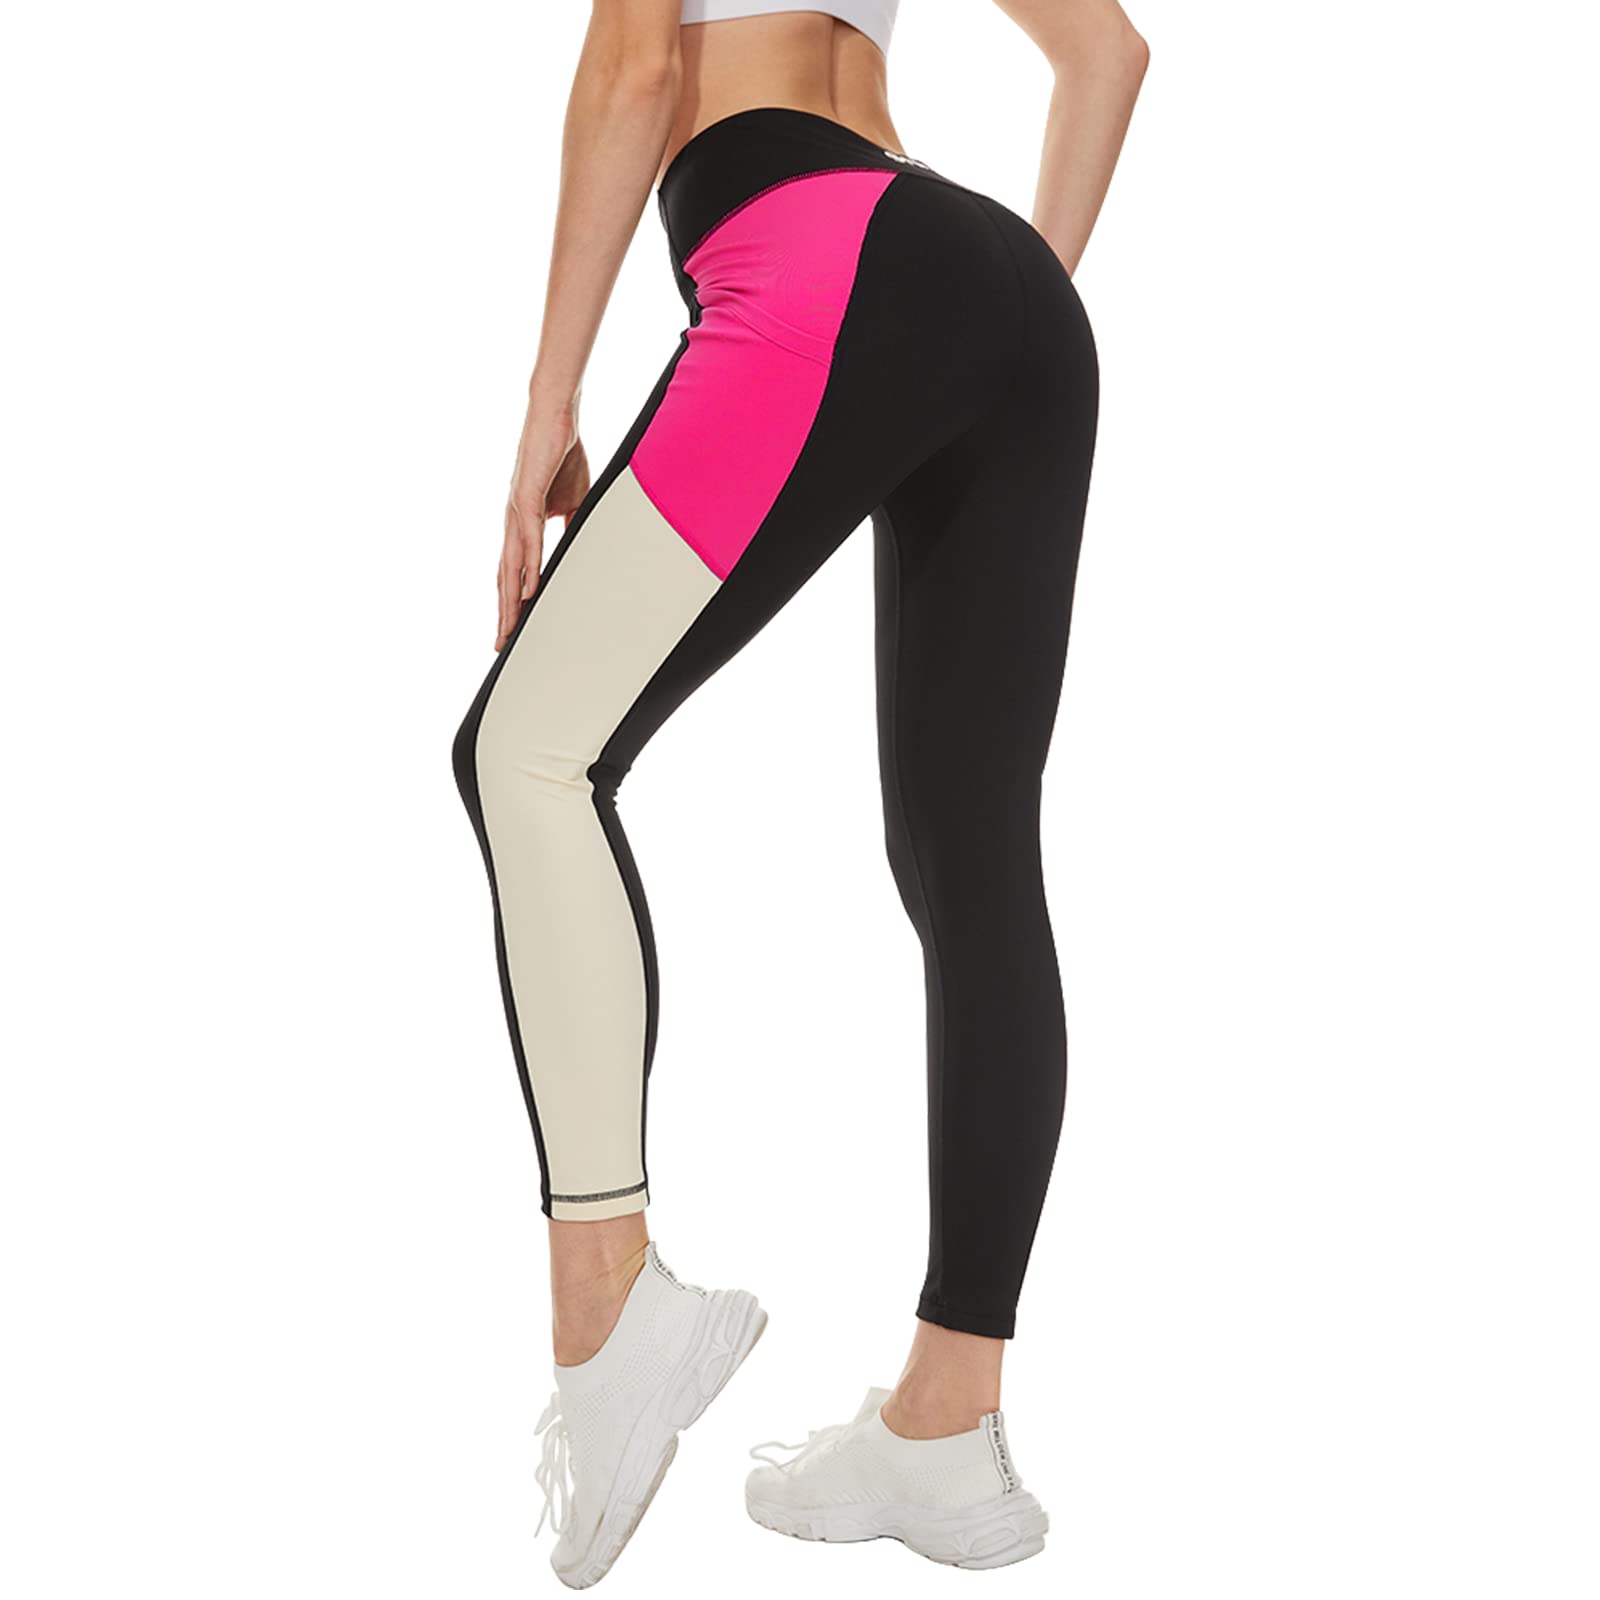 Leggings High Waste - Athletic Pants for Running, Working Out